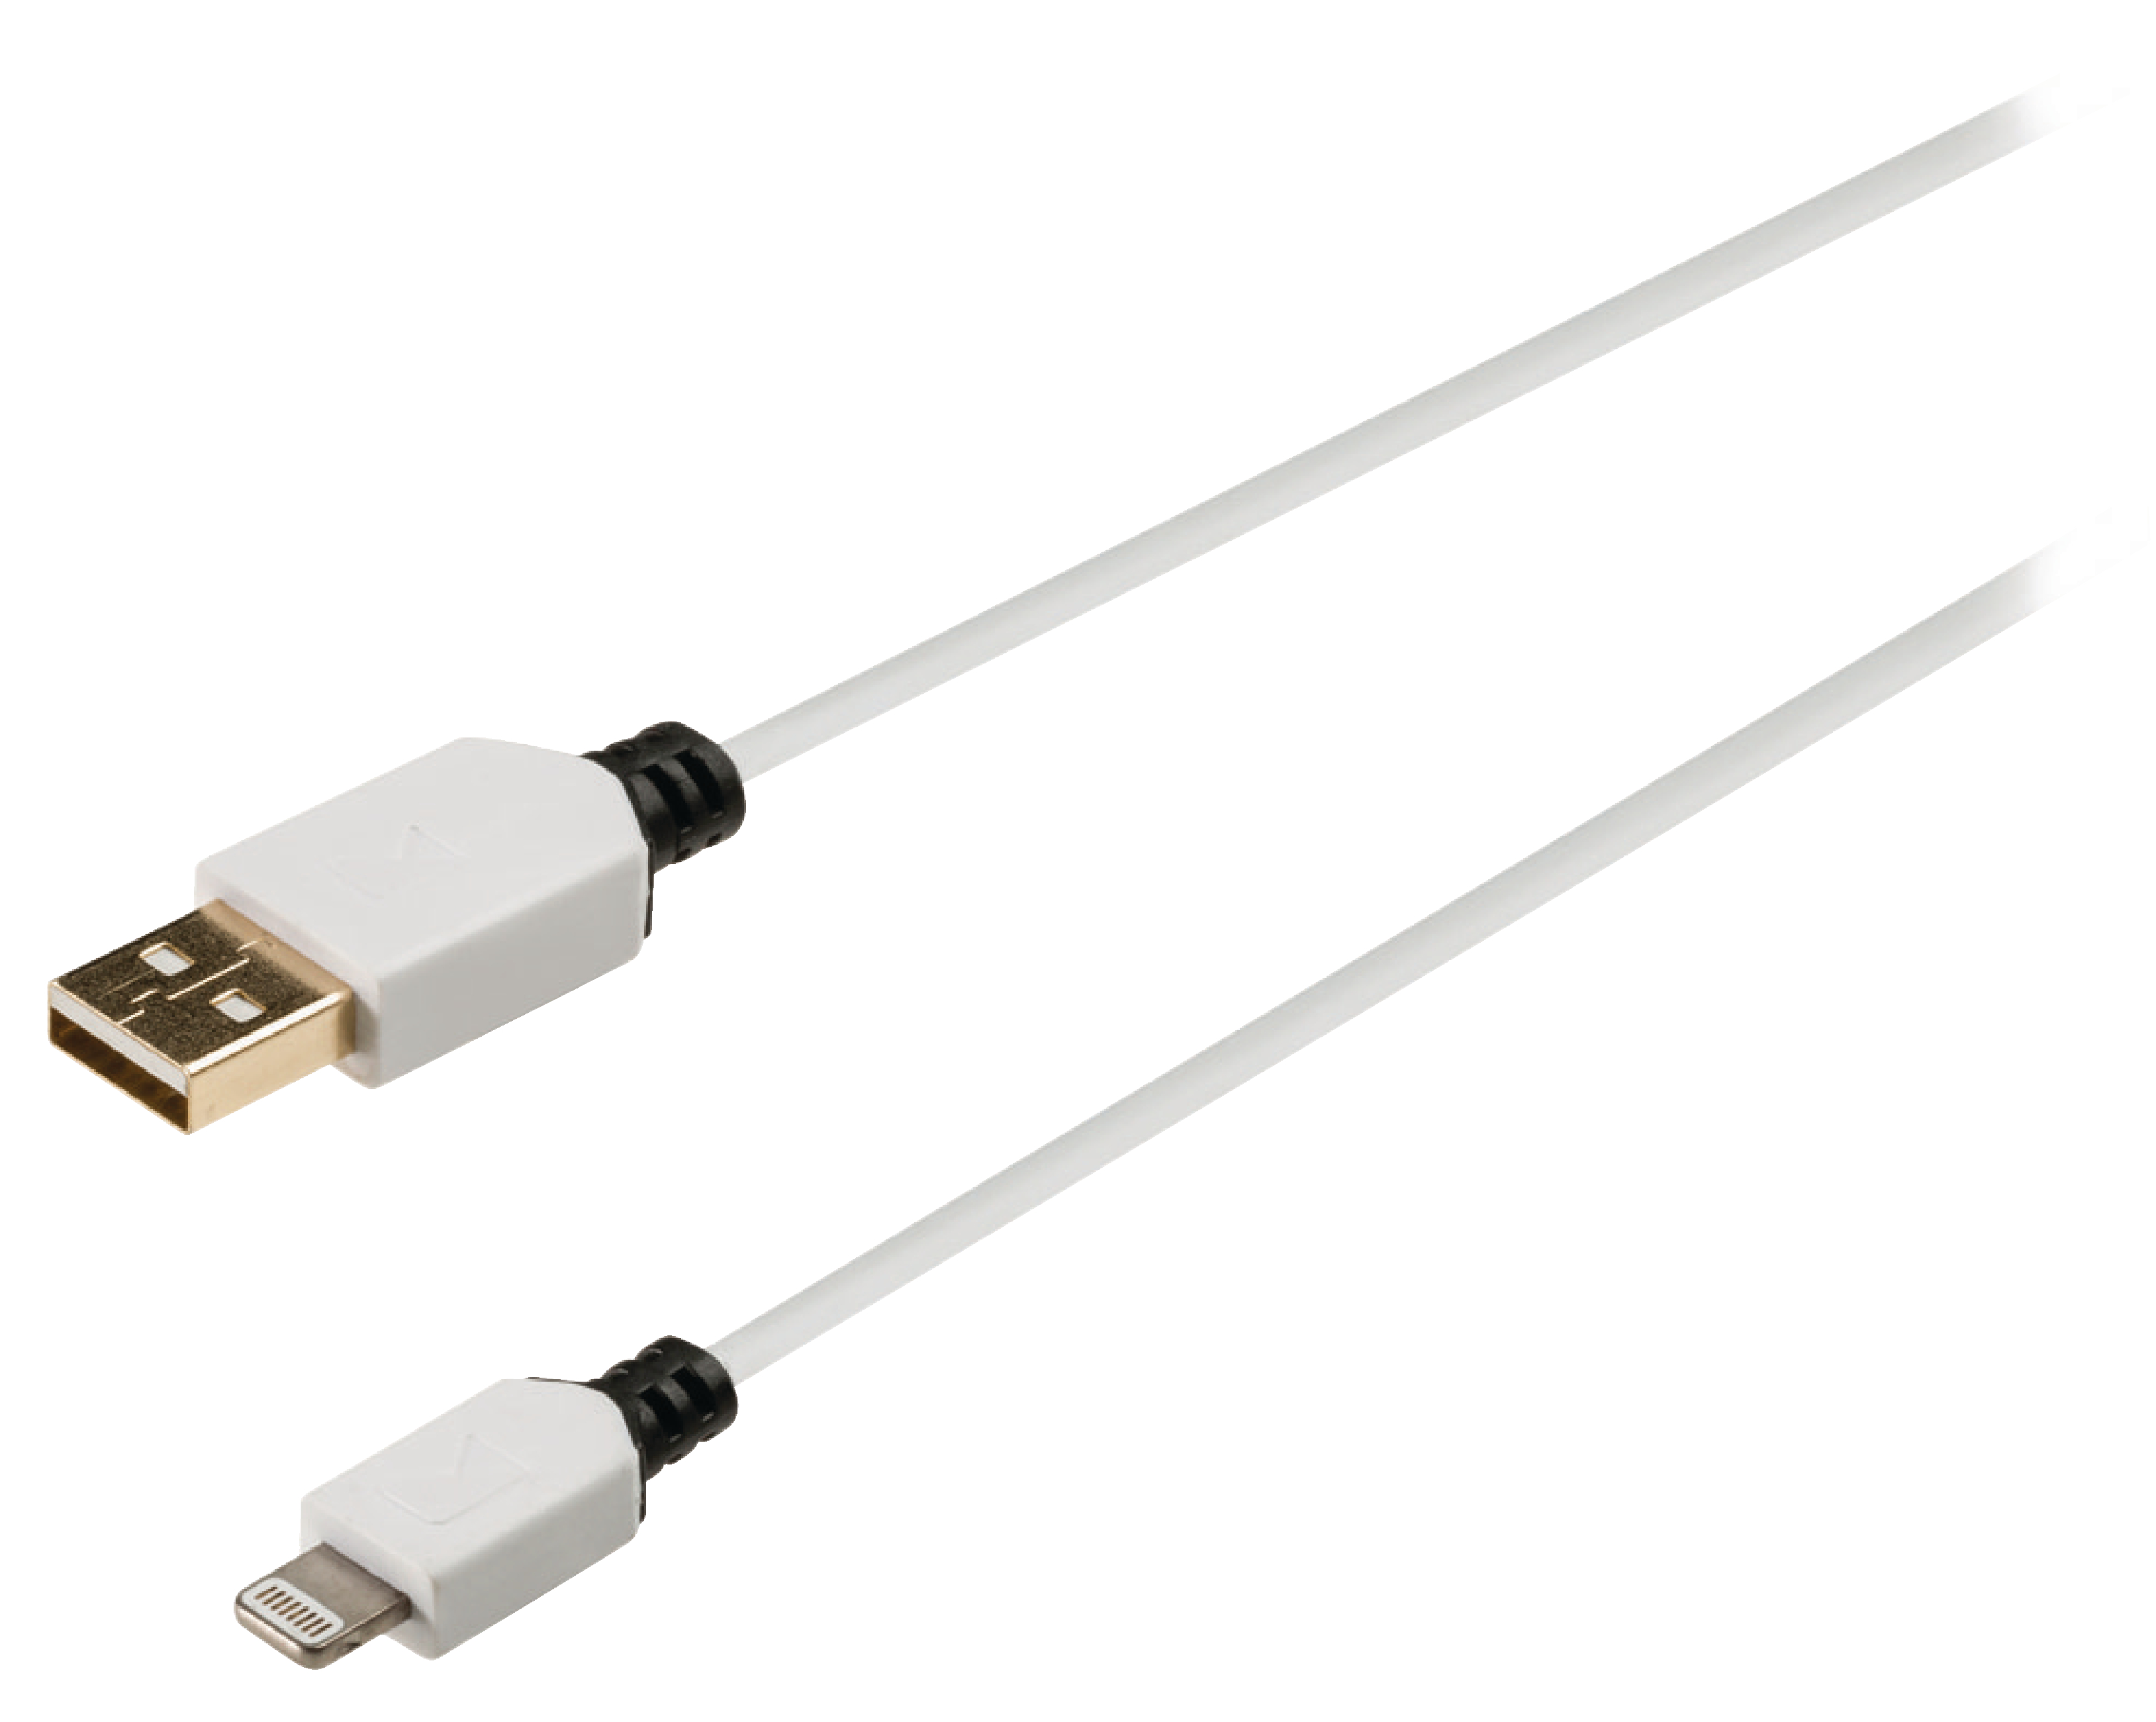 KNM39300W10  CABLE LIGHTNING 1mts iPHONE / iPAD